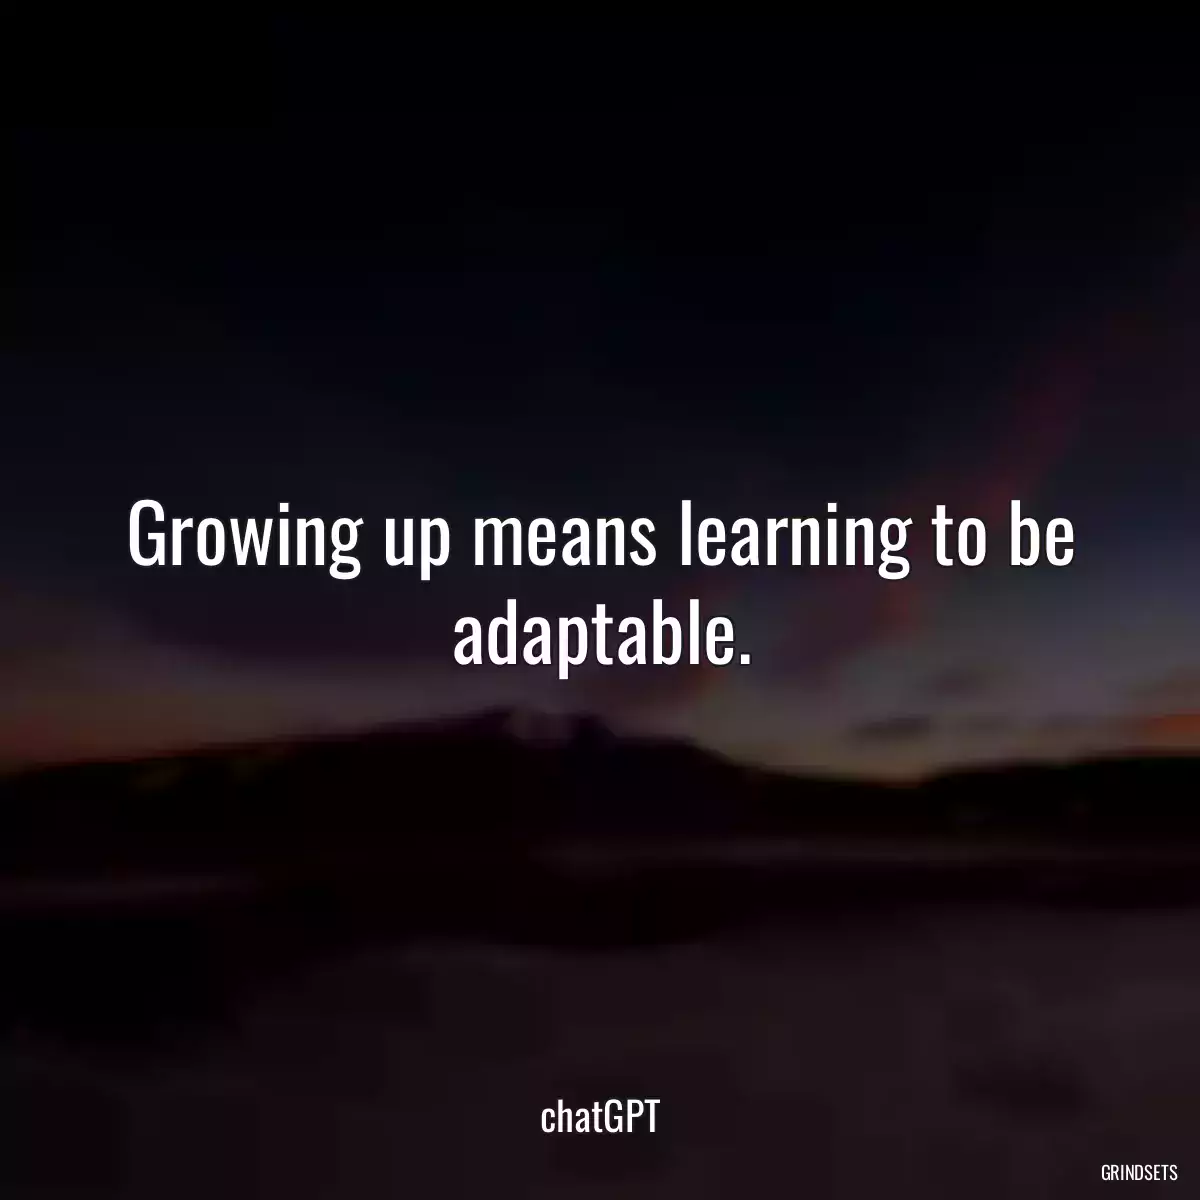 Growing up means learning to be adaptable.